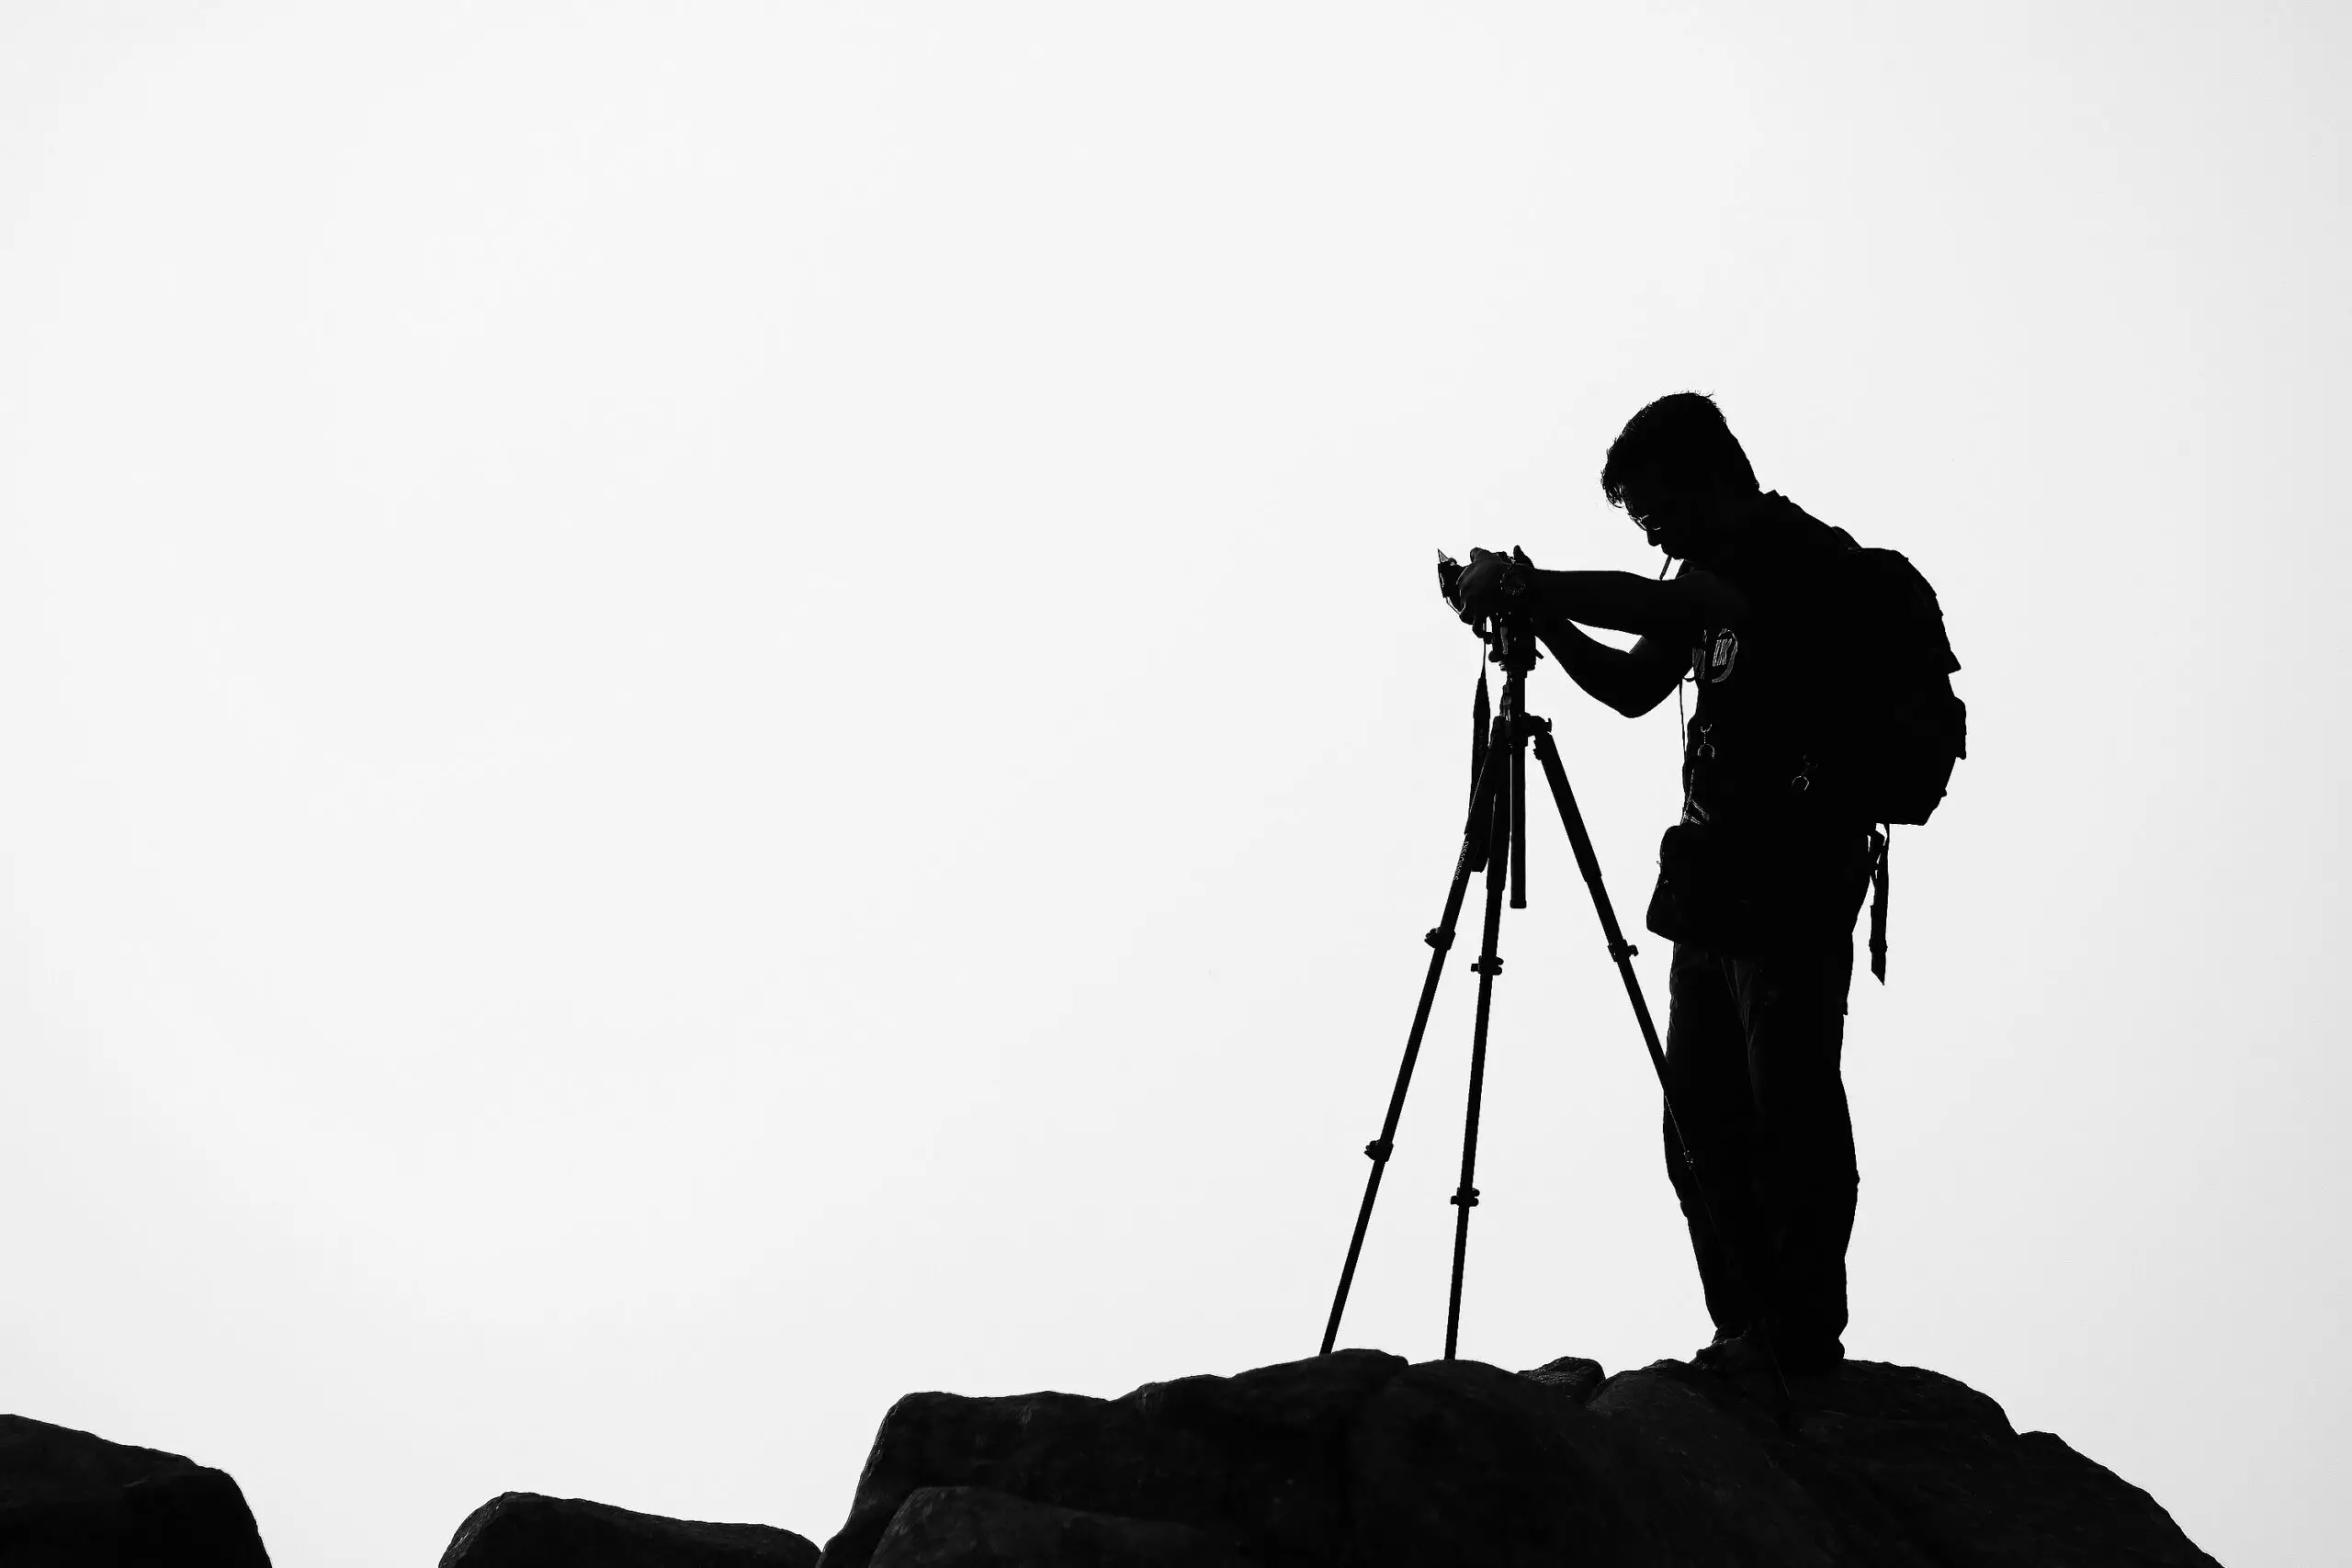 Silhouette of man holding camera